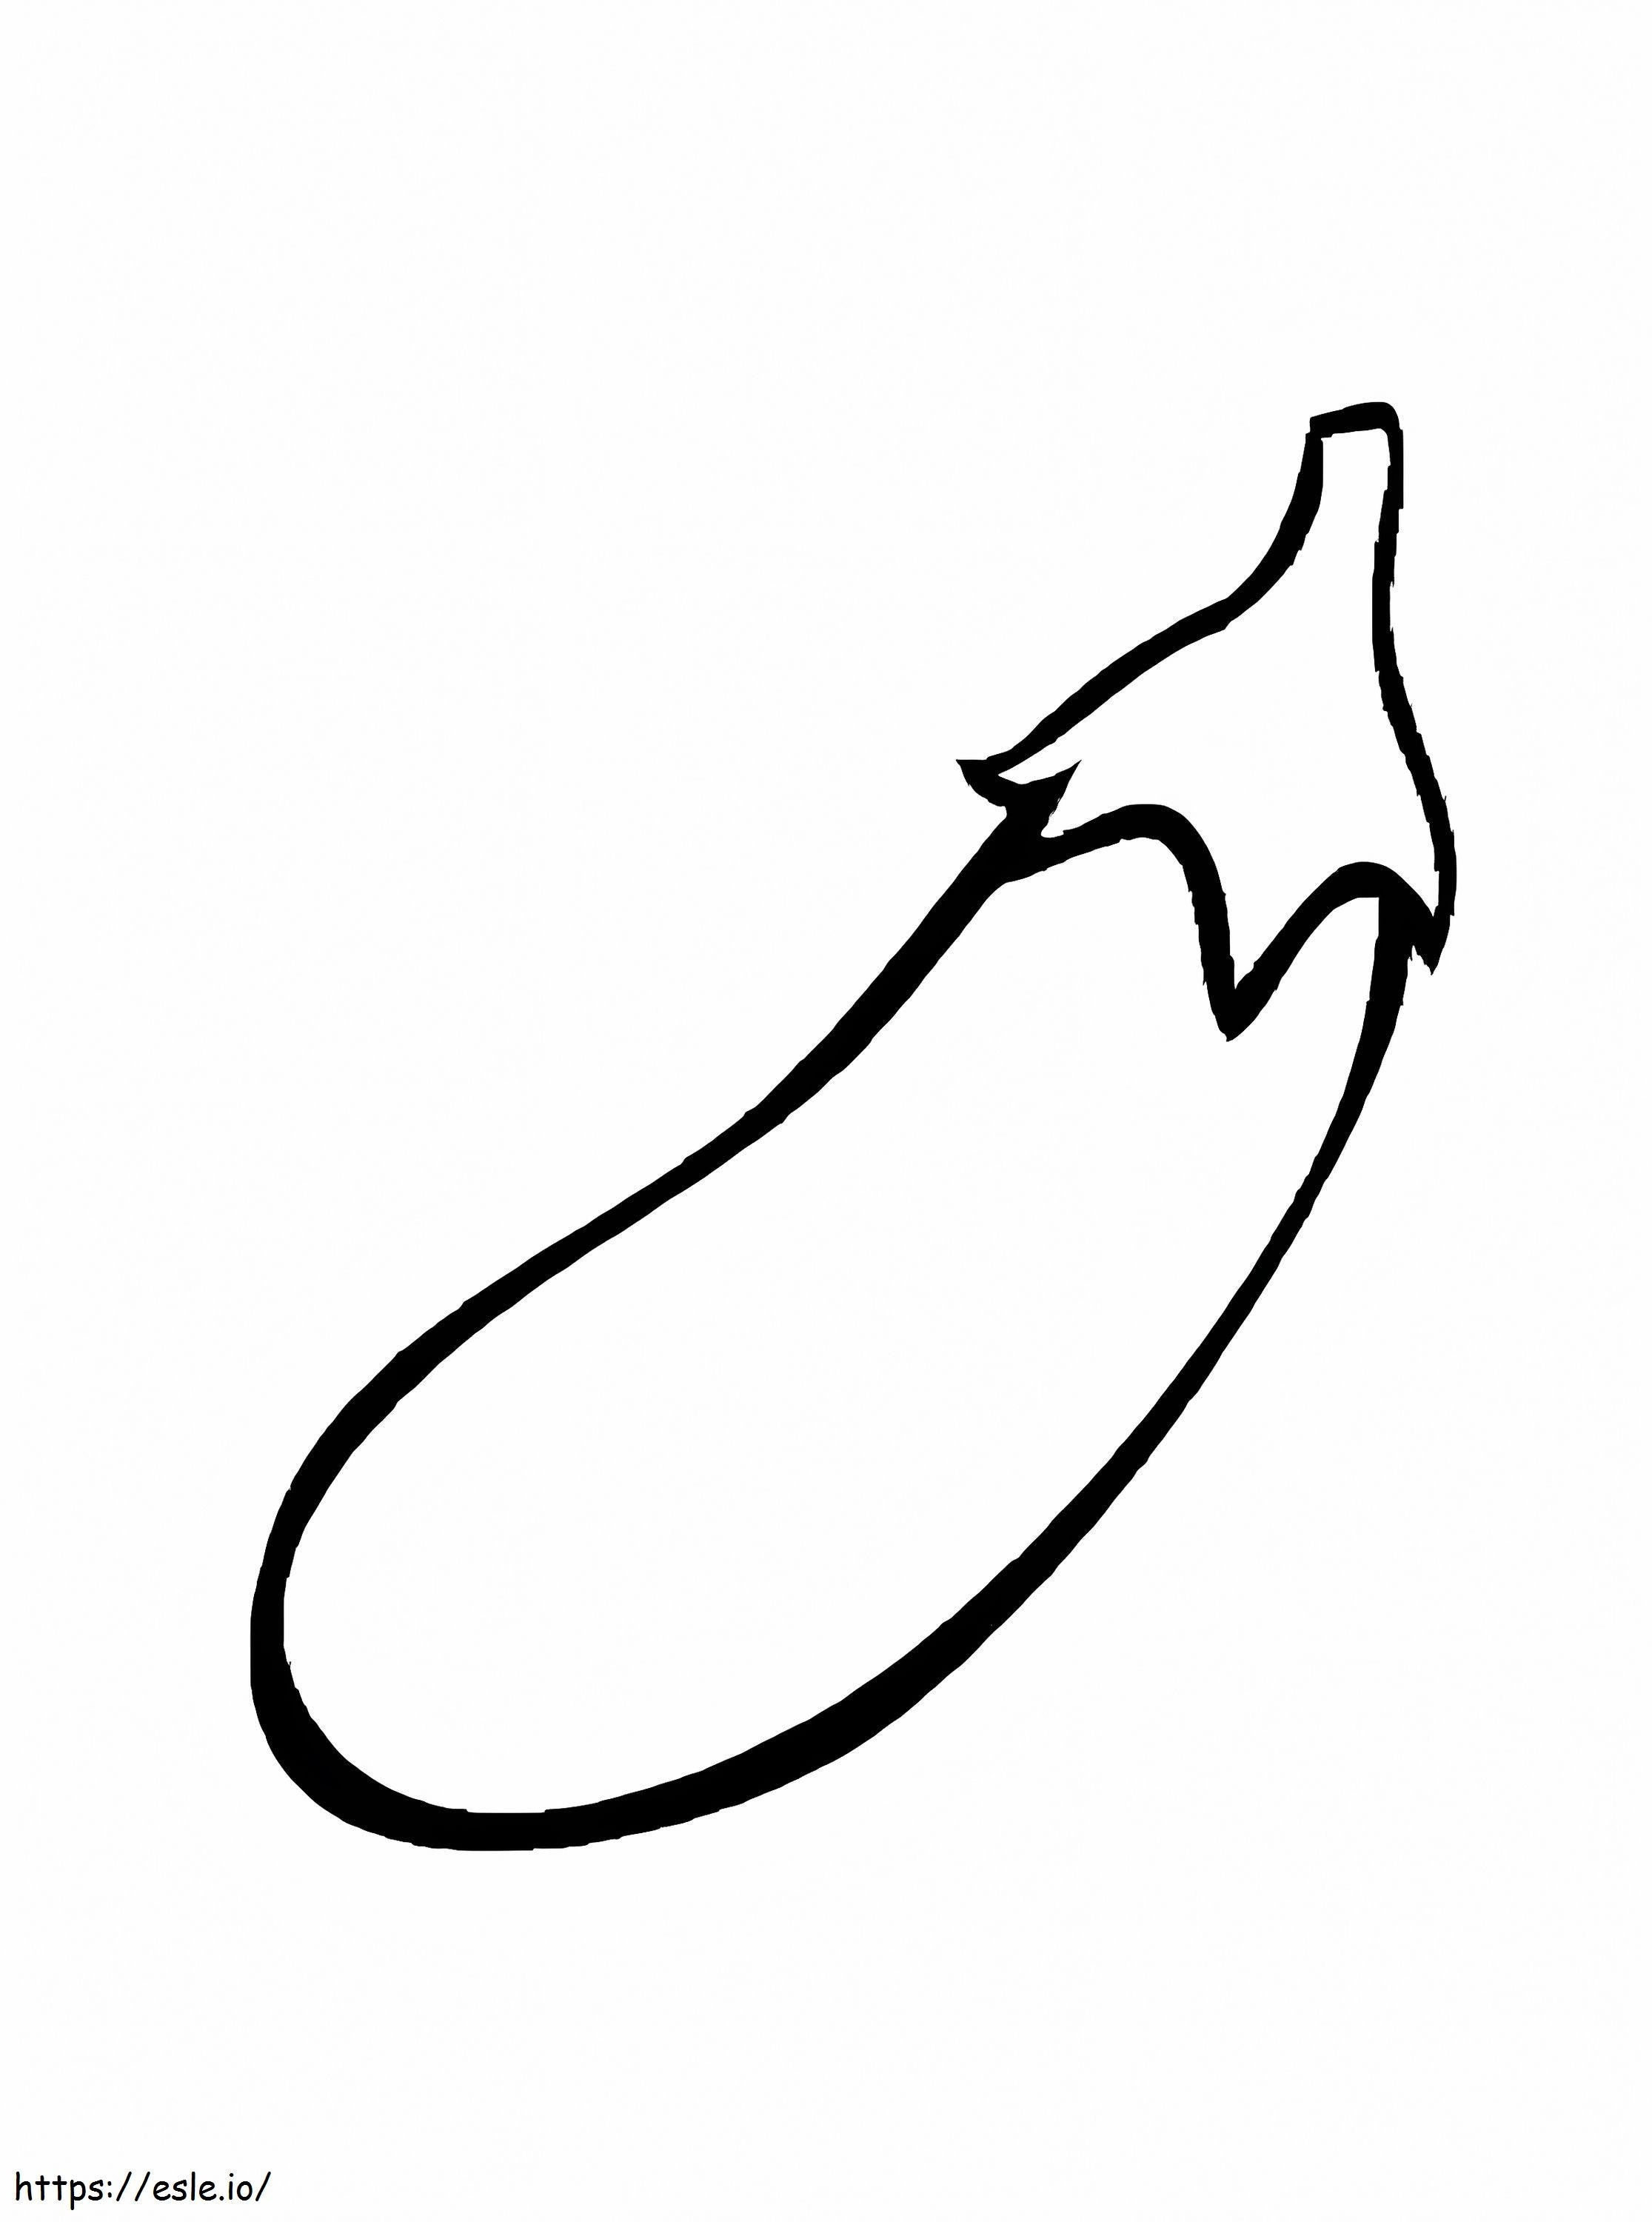 Normal Eggplant coloring page